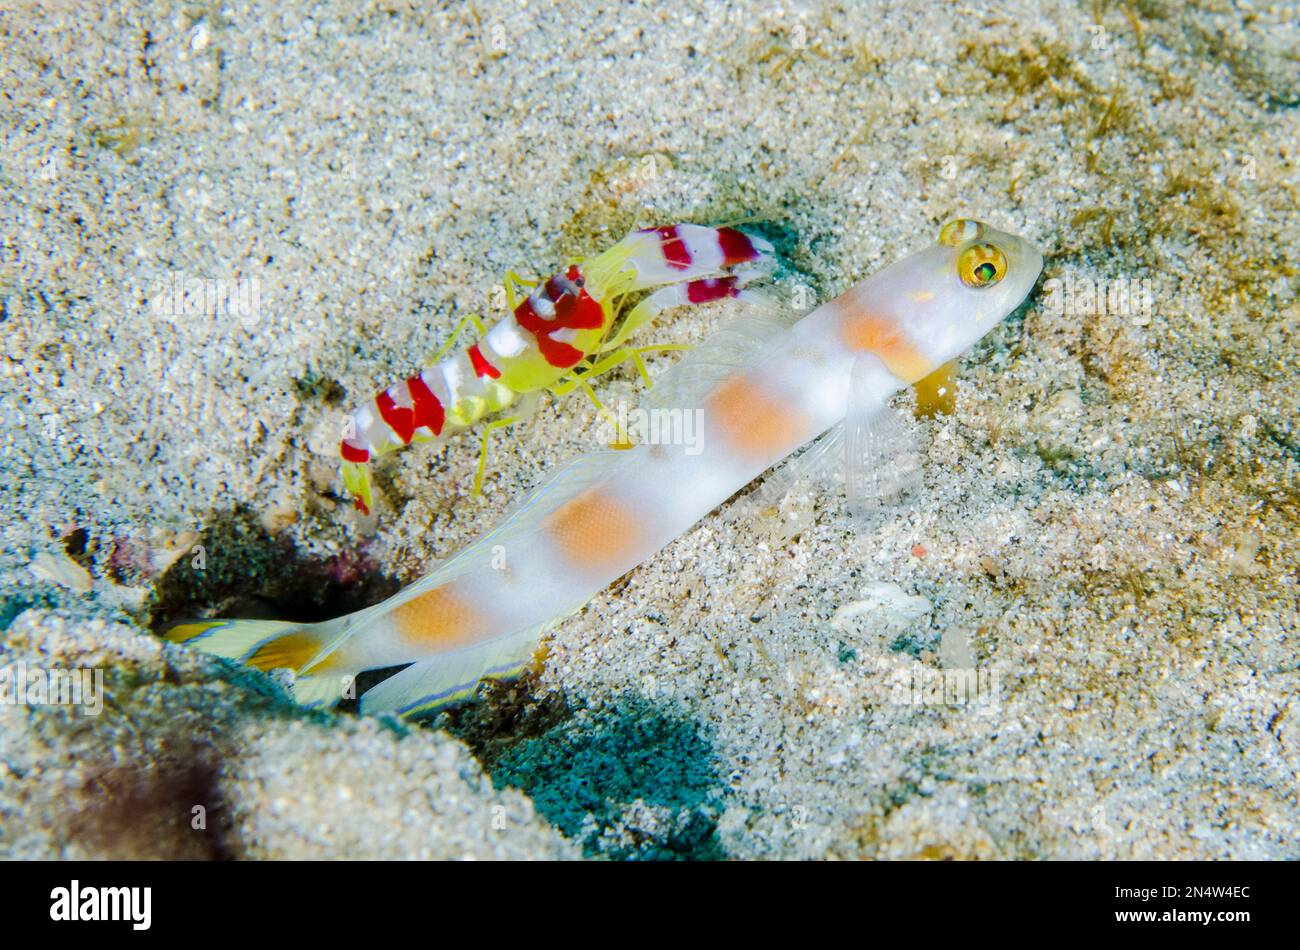 Flagtail Shrimpgoby, Amblyeleotris yanoi, with Randall's Snapping Shrimp, Alpheus randalli, where the shrimp who are natural burrowers digs and cleans Stock Photo